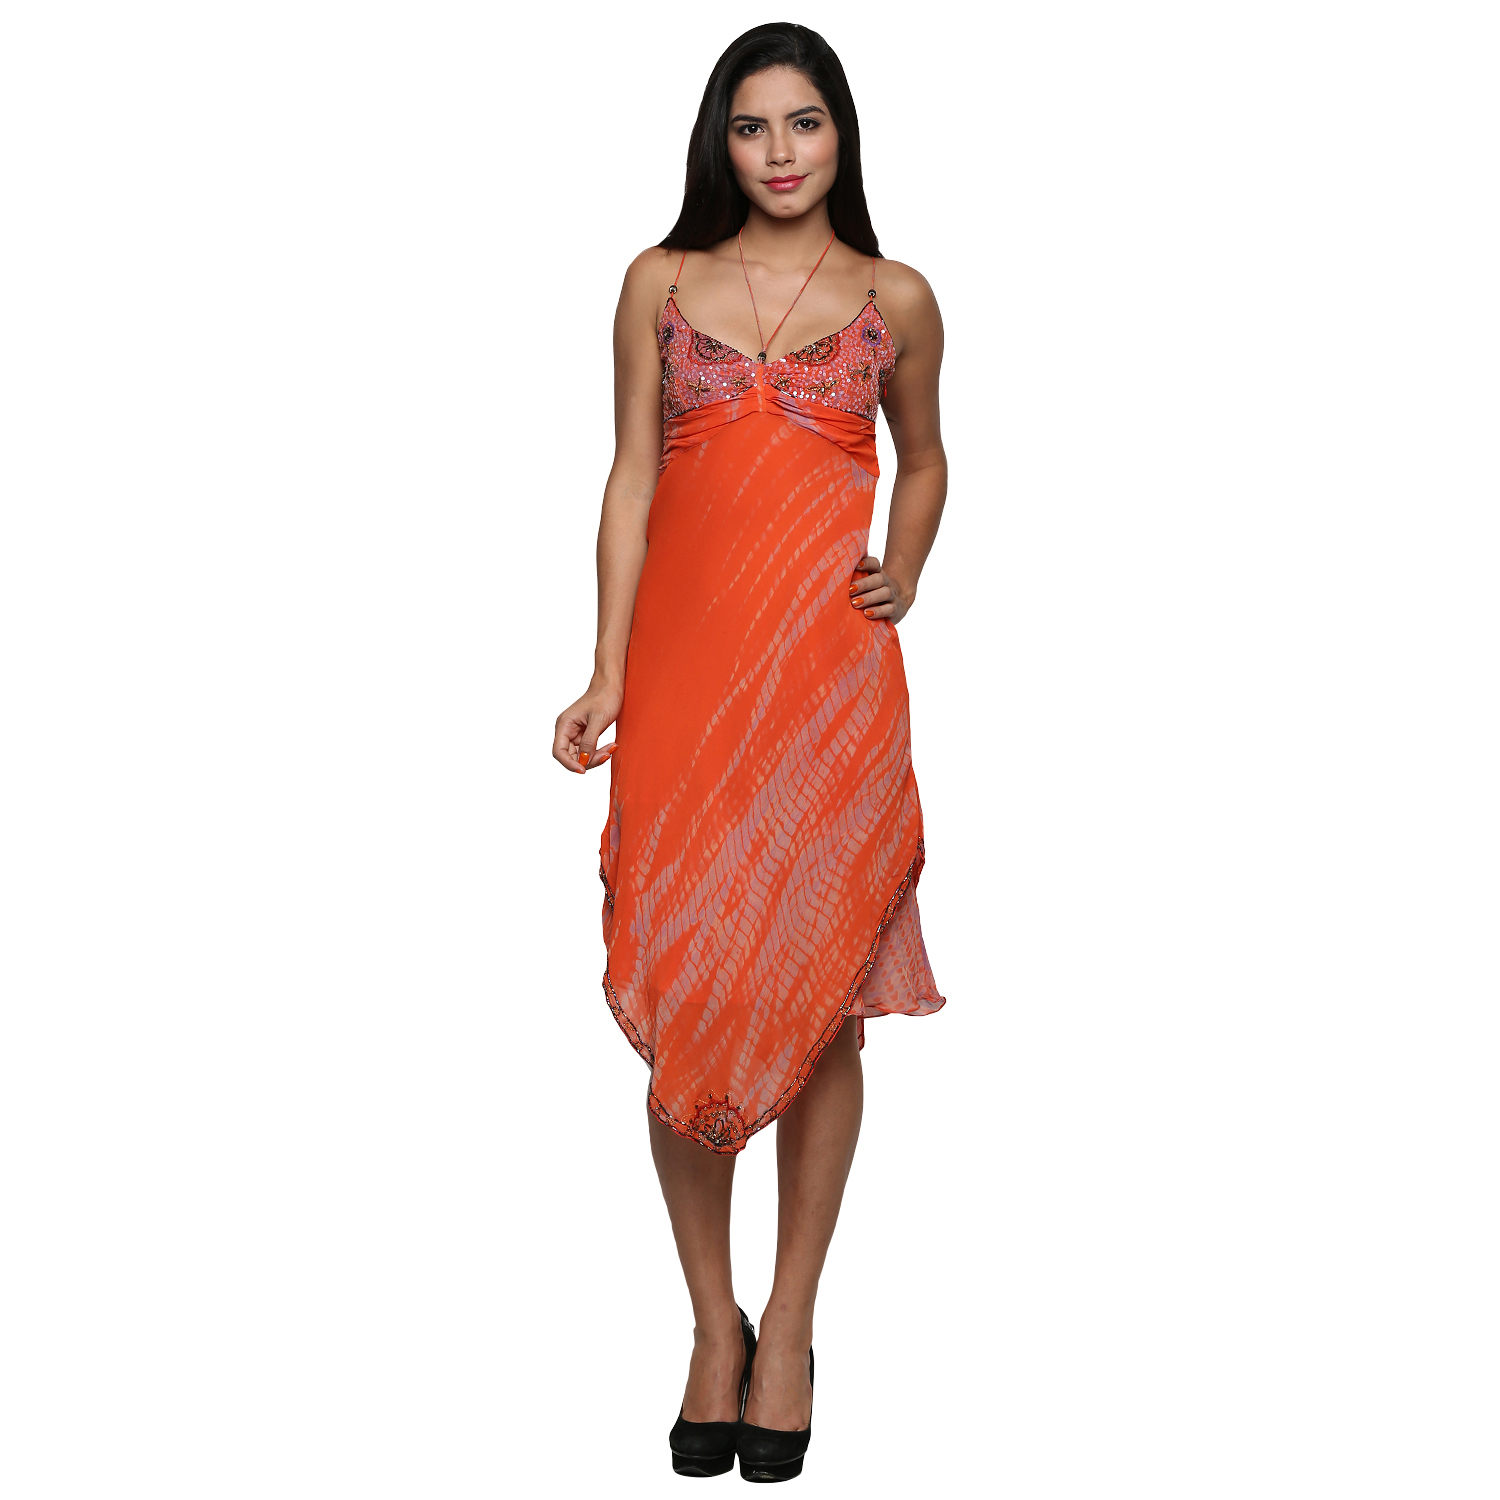 The Cleavage Orange Polyester Round Neck Sleeveless Causal Dress for Women